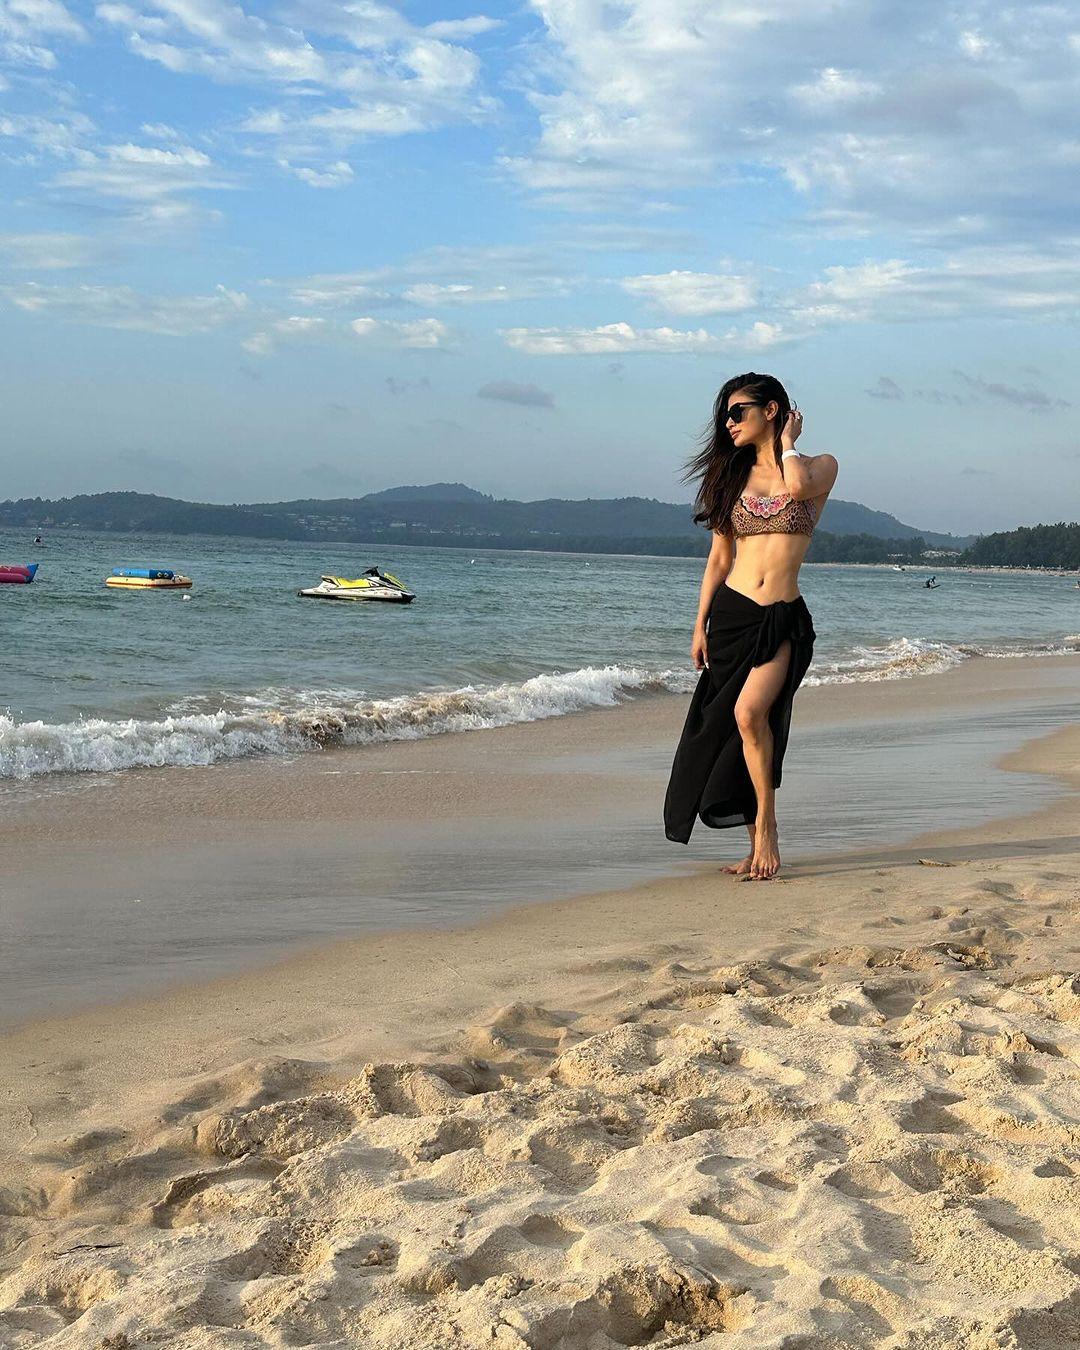 Mouni Roy has been keeping busy with multiple projects in line, and taking a break from the hectic schedule is a must. And we think a beach is the best place in such situations